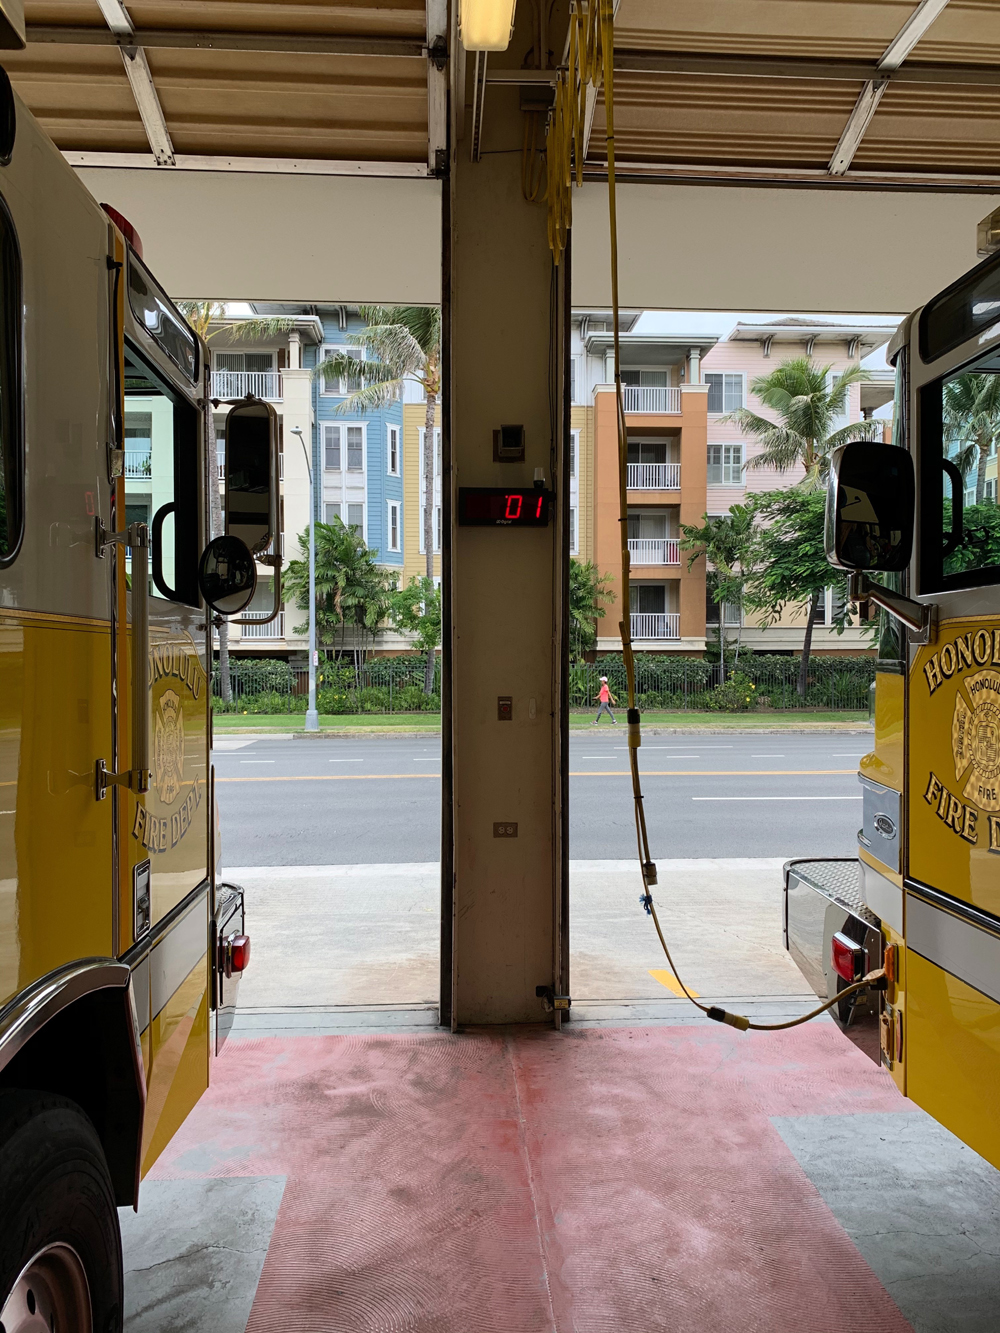 Fire Department turn out timer controlled through network and dispatch software